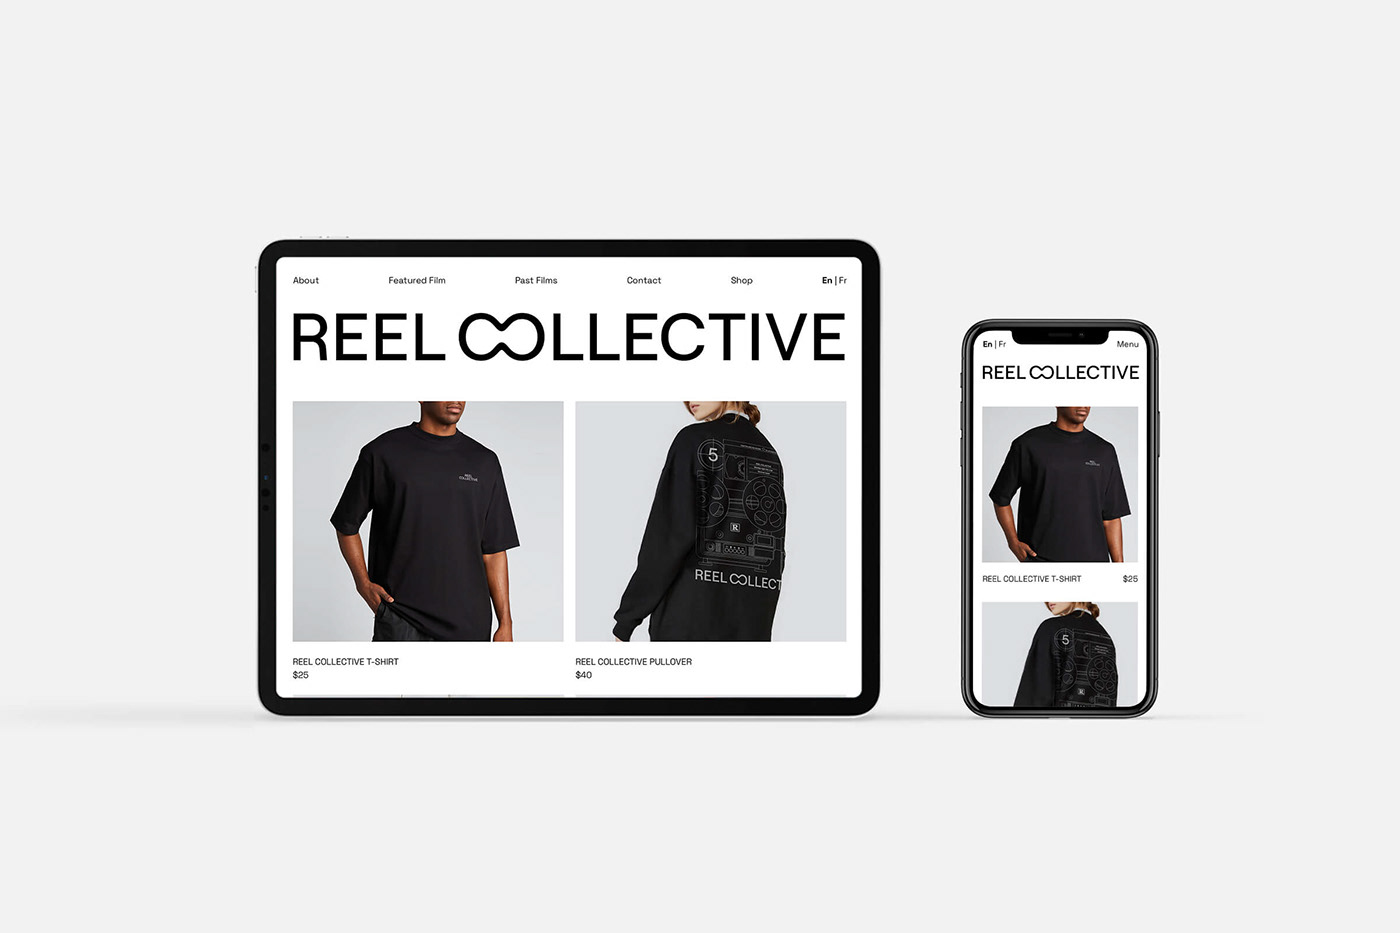 Reel Collective responsive web design in tablet and mobile devices.